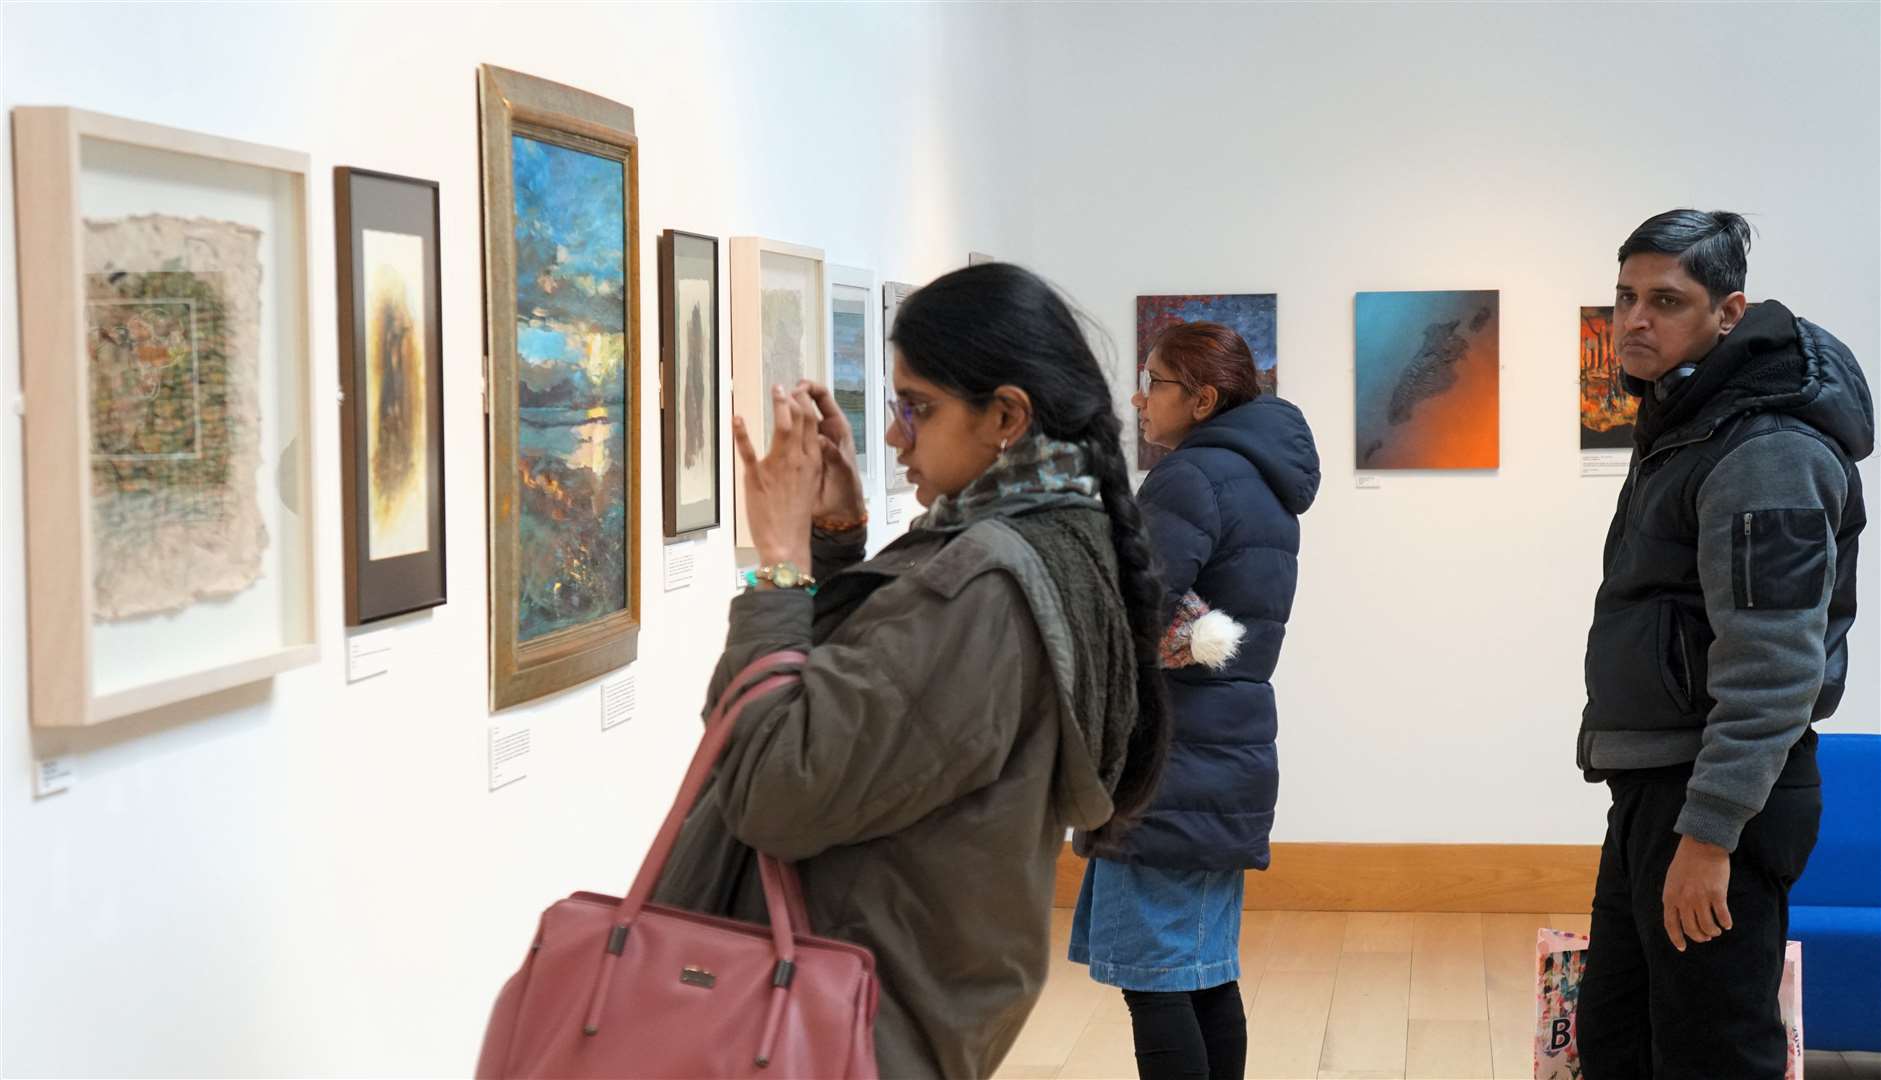 Some of the many visitors at the exhibition of local artworks at the North Coast Visitor Centre in Thurso. Picture: DGS